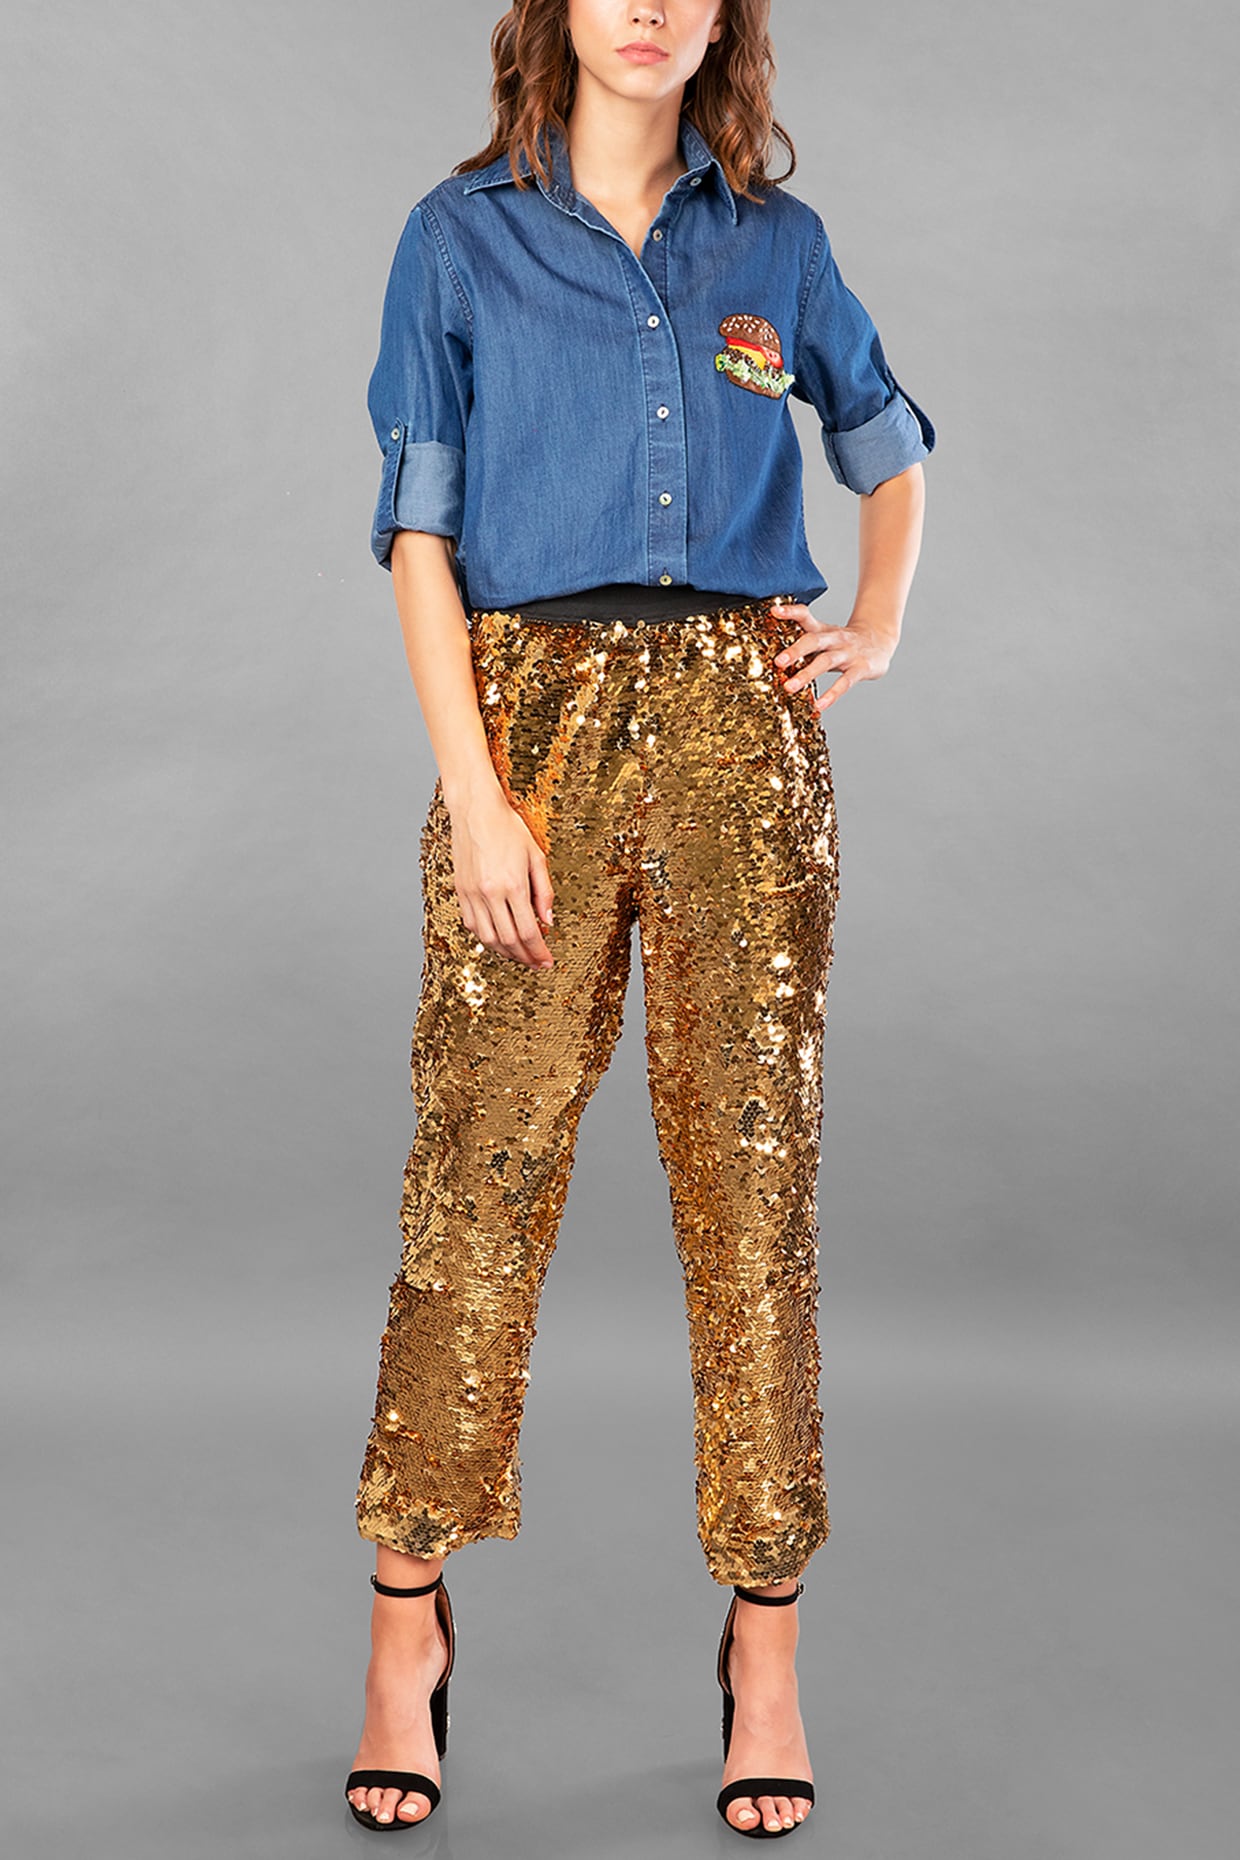 Buy Online Green And Gold Poly Metallic Cotton Pants for Women  Girls at  Best Prices in Biba India